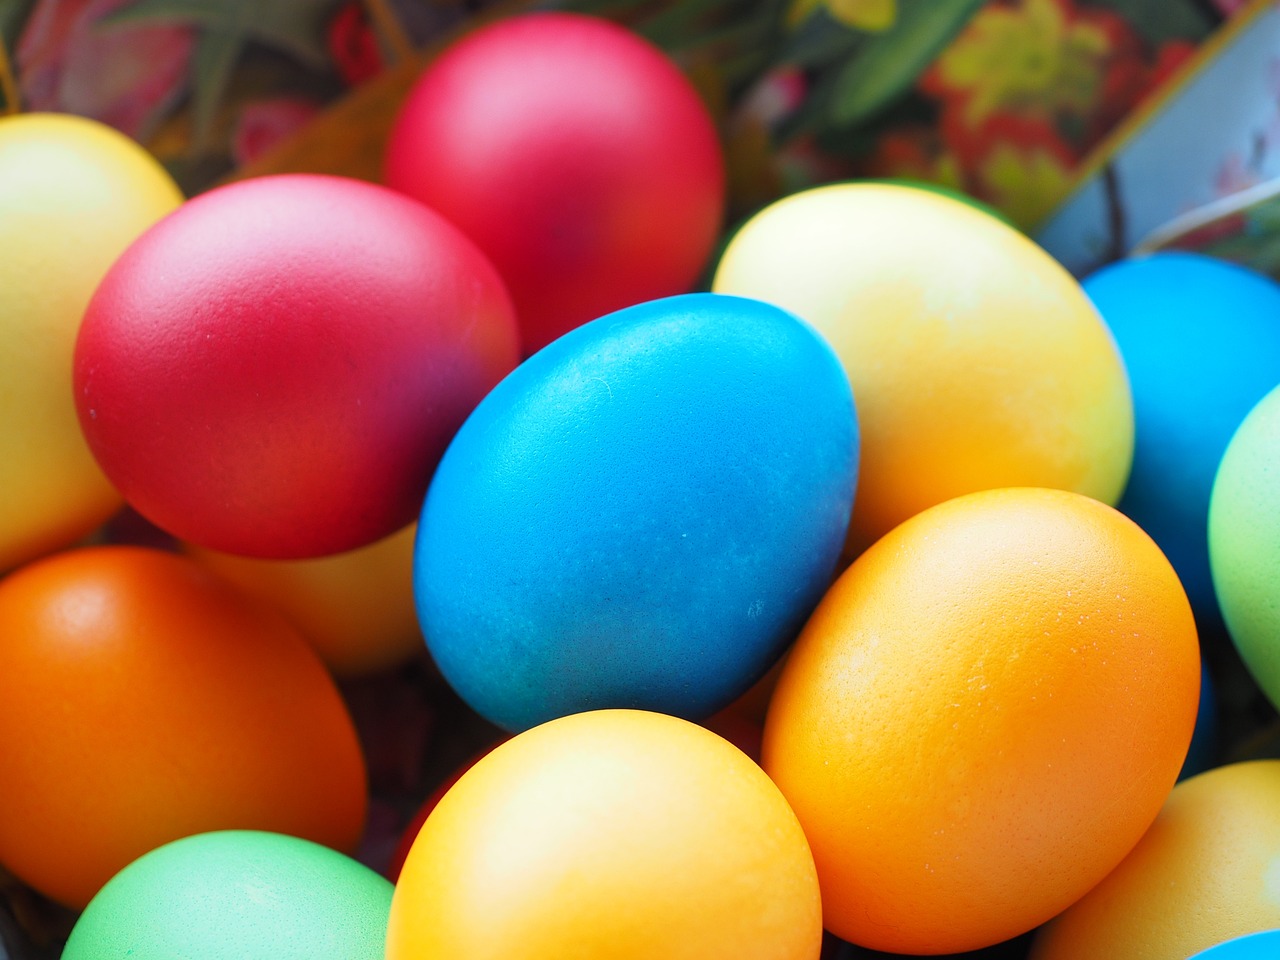 An assortment of colored eggs